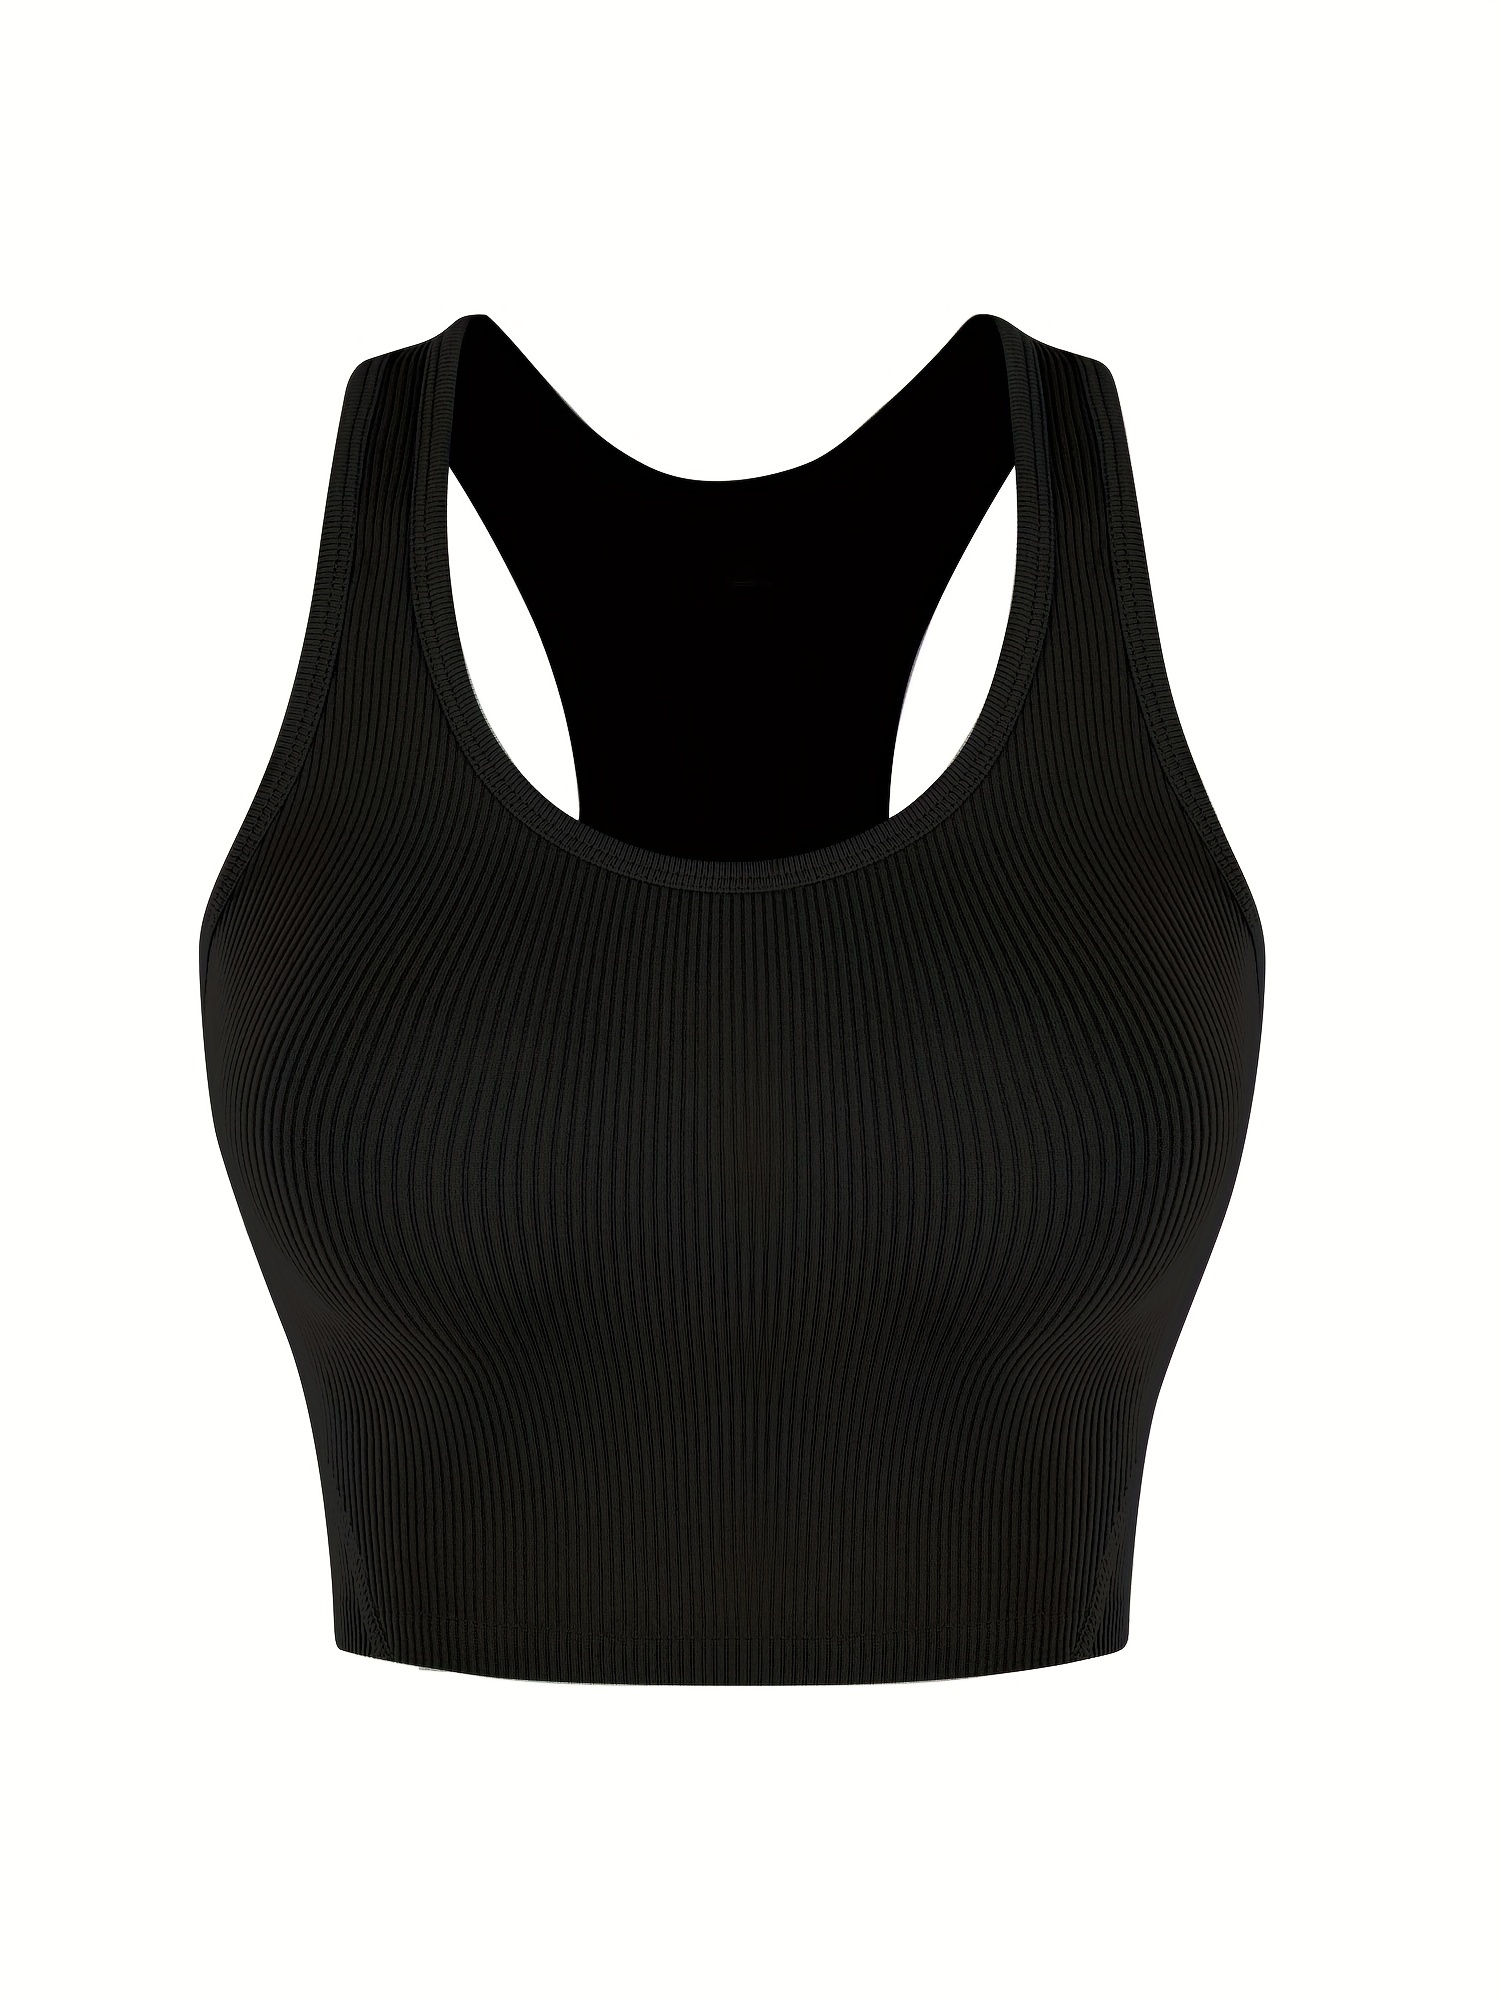 Women Workout Tank Top Sleevelss Ribbed Stretch Yoga Top Tthletic  Compression Active Wear Seamless Tight Sports Running T Shirt Vest Black  XL=US 14